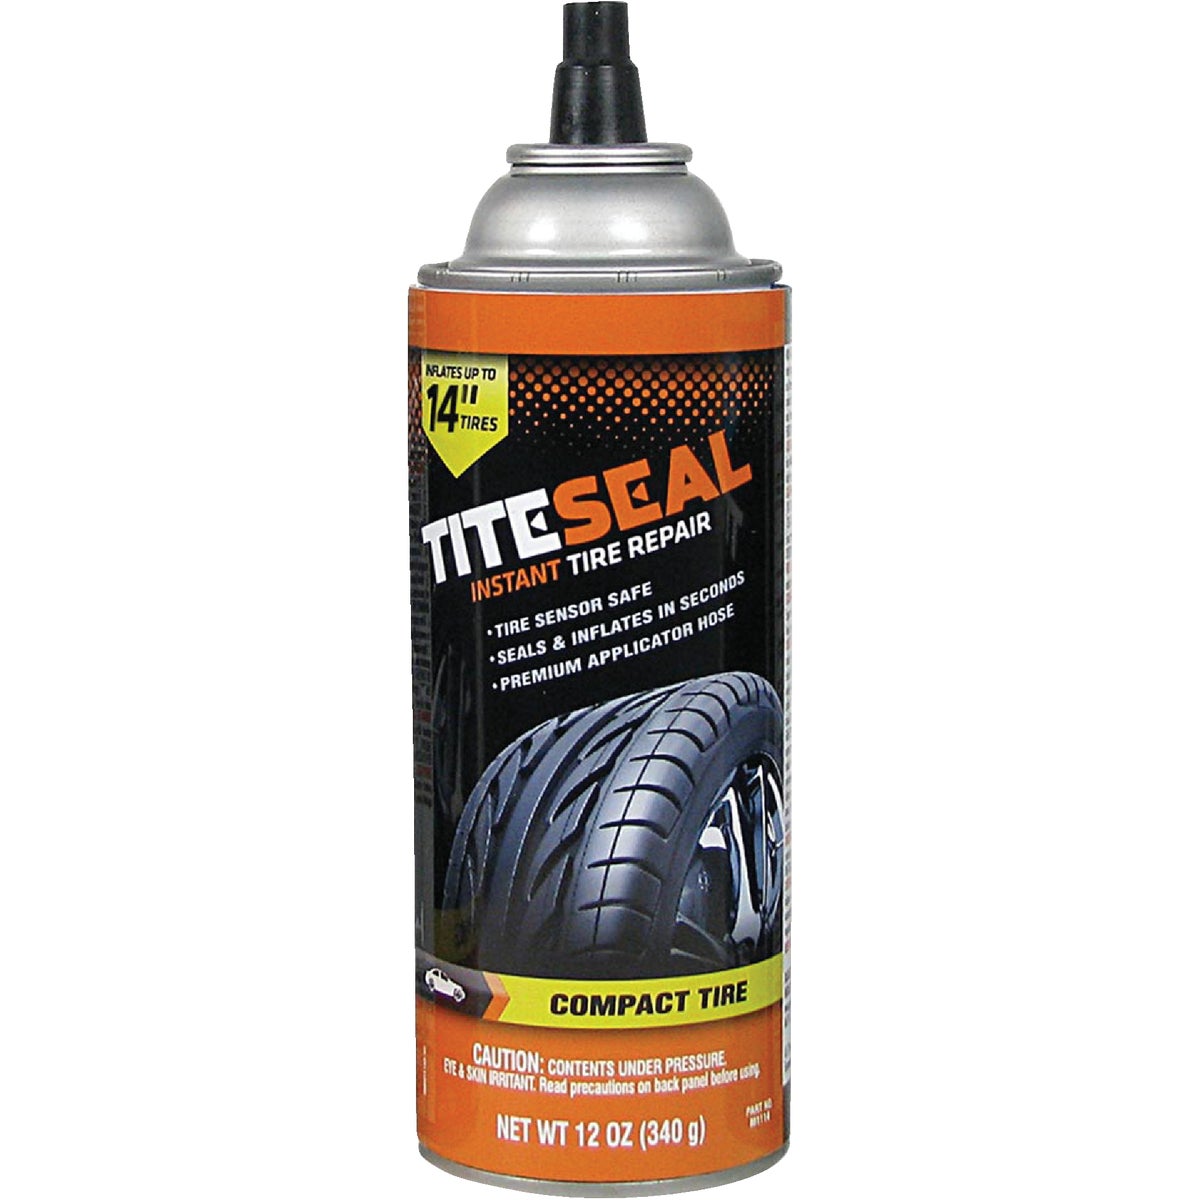 Item 588644, Seals and inflates tires in seconds. Safe and easy-to-use.